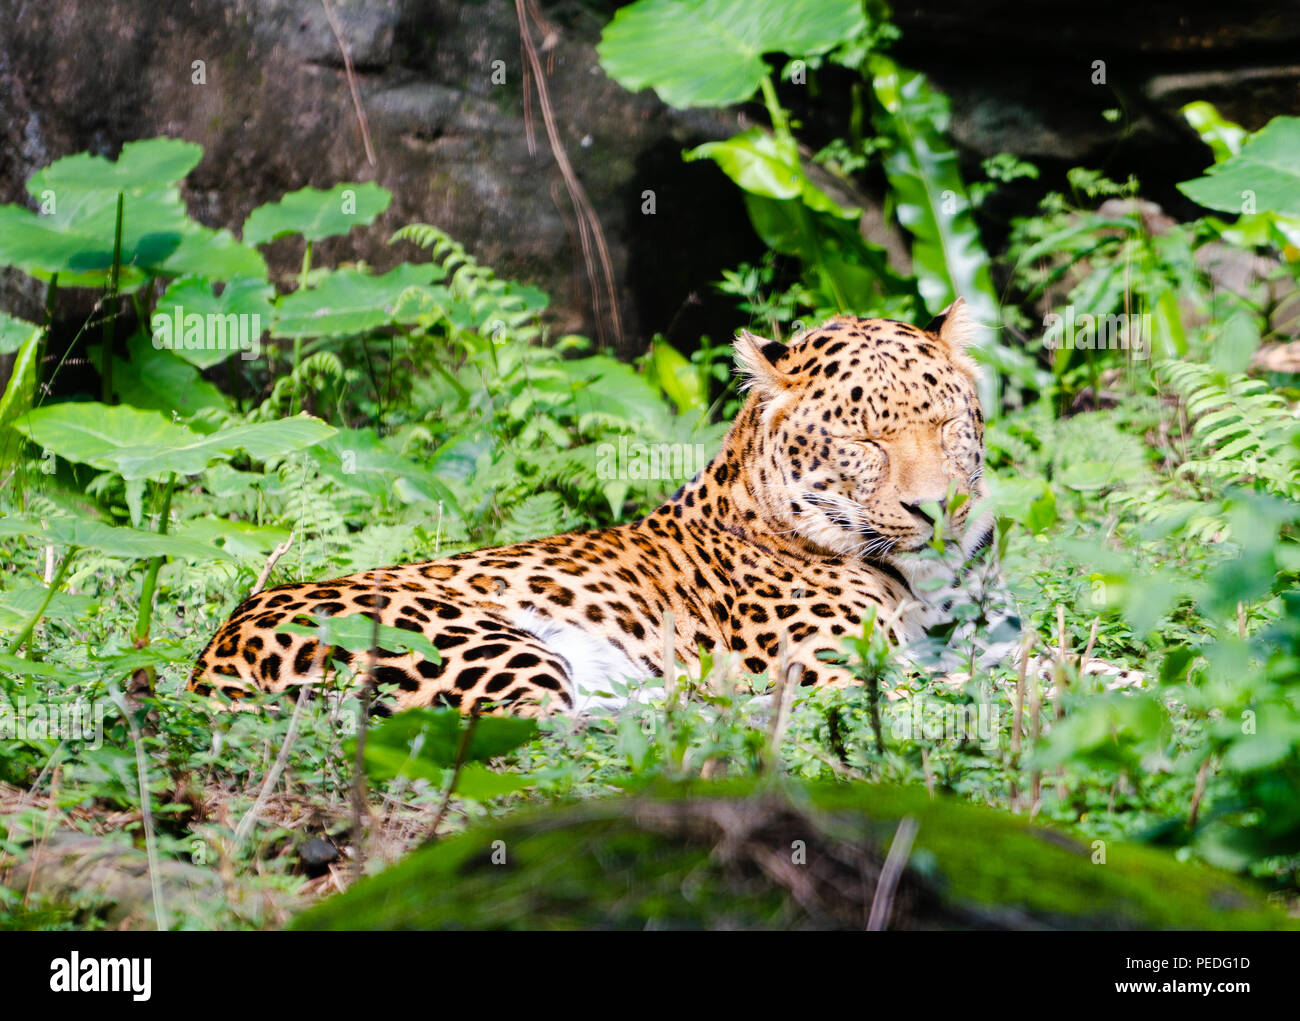 Leopard Panthera pardus resting in middle of green nature with closed eyes Stock Photo